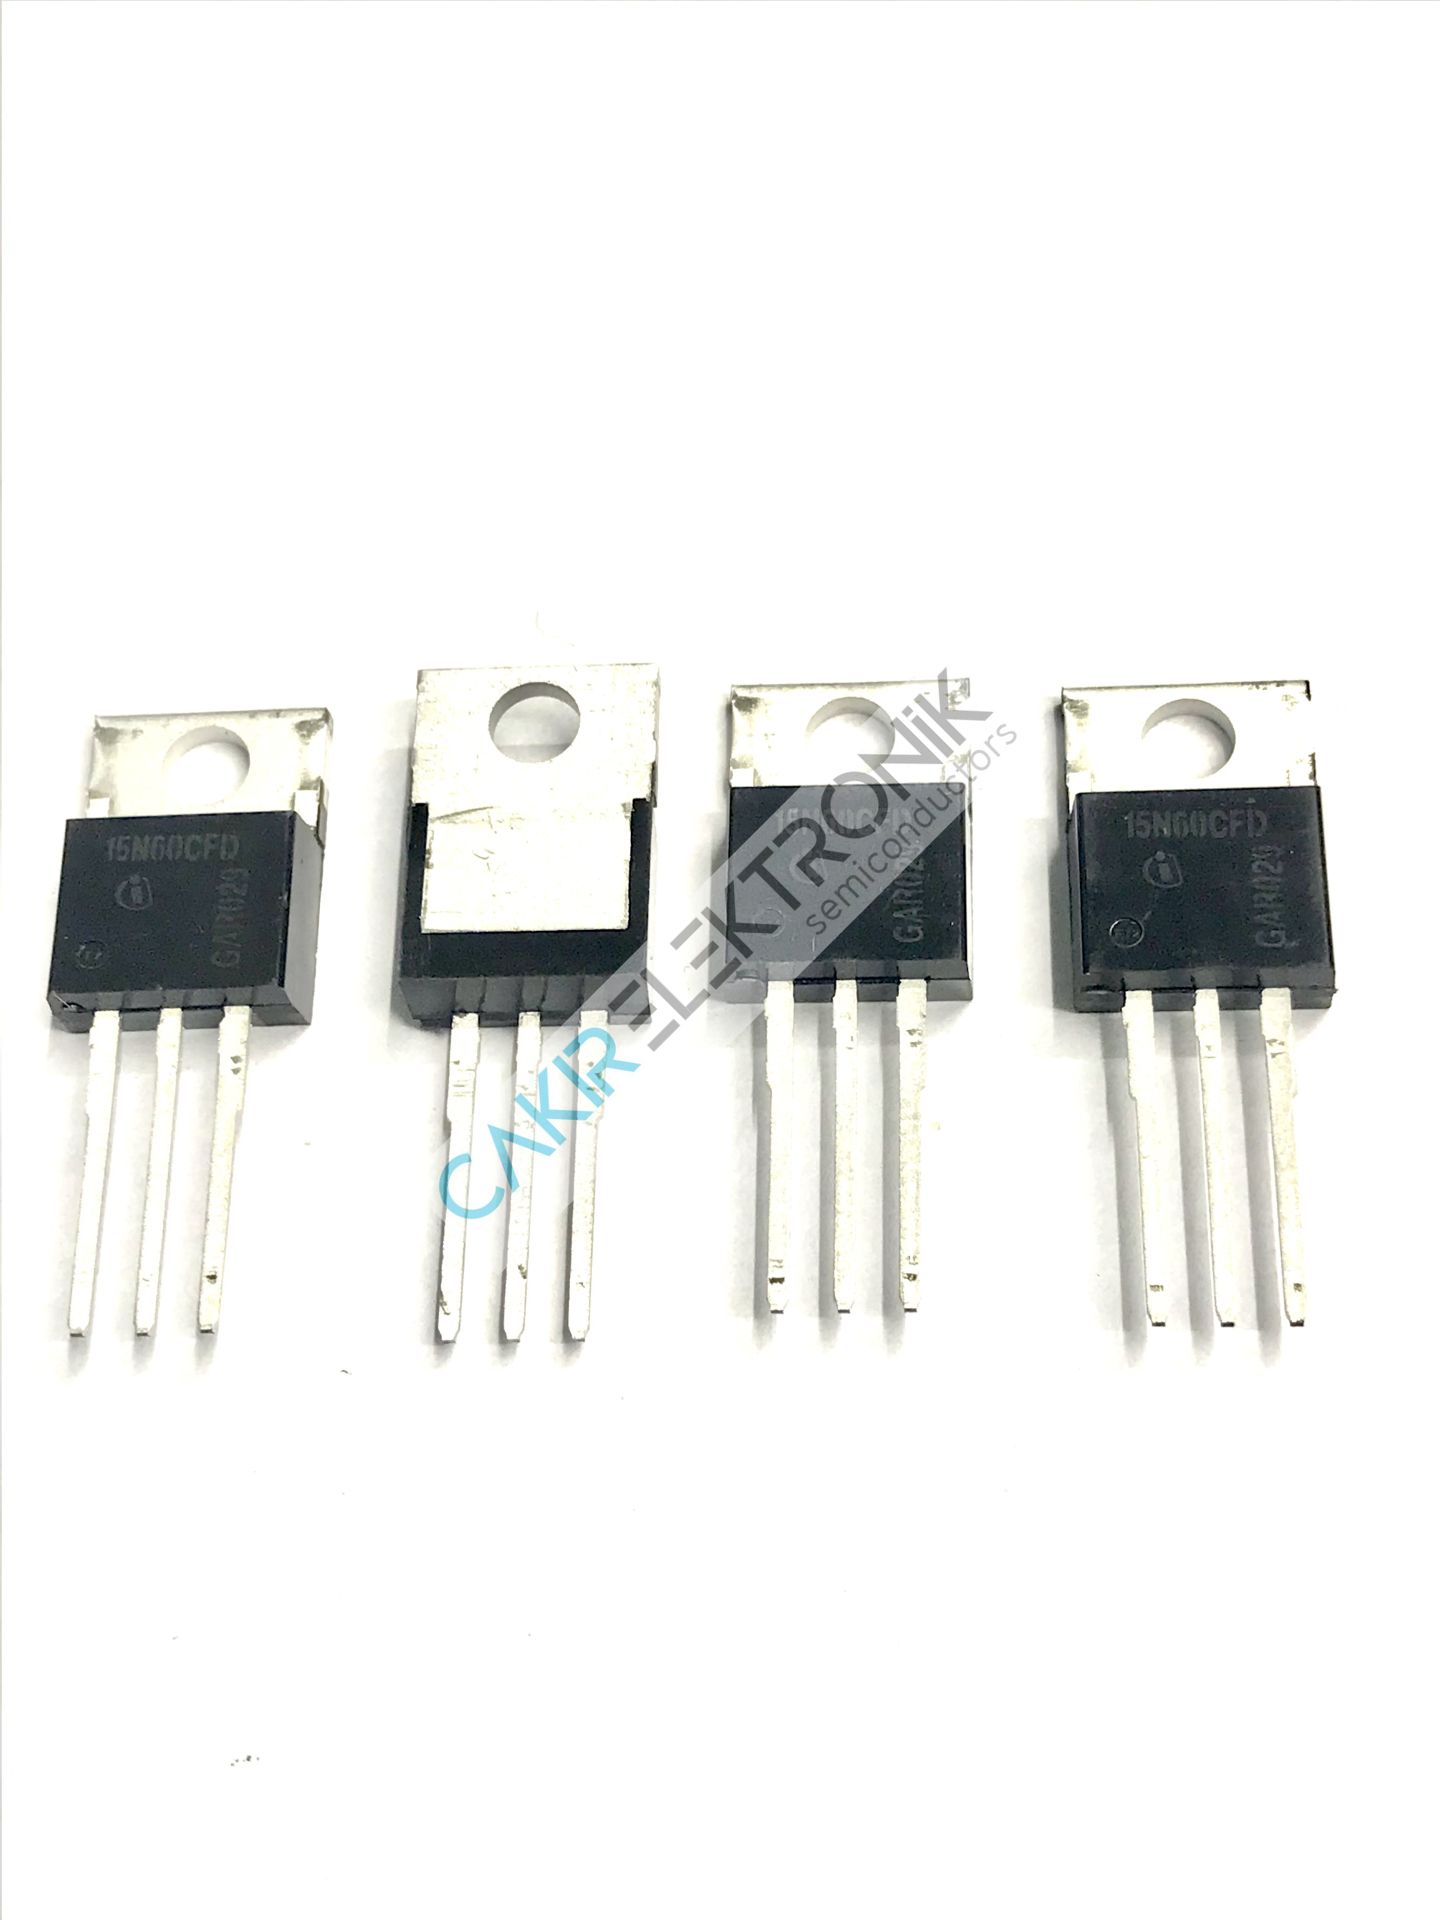 SPP15N60CFD - 15N60CFD -N-Channel 650 V 13.4A (Tc) 156W (Tc) Through Hole PG-TO220-3-1